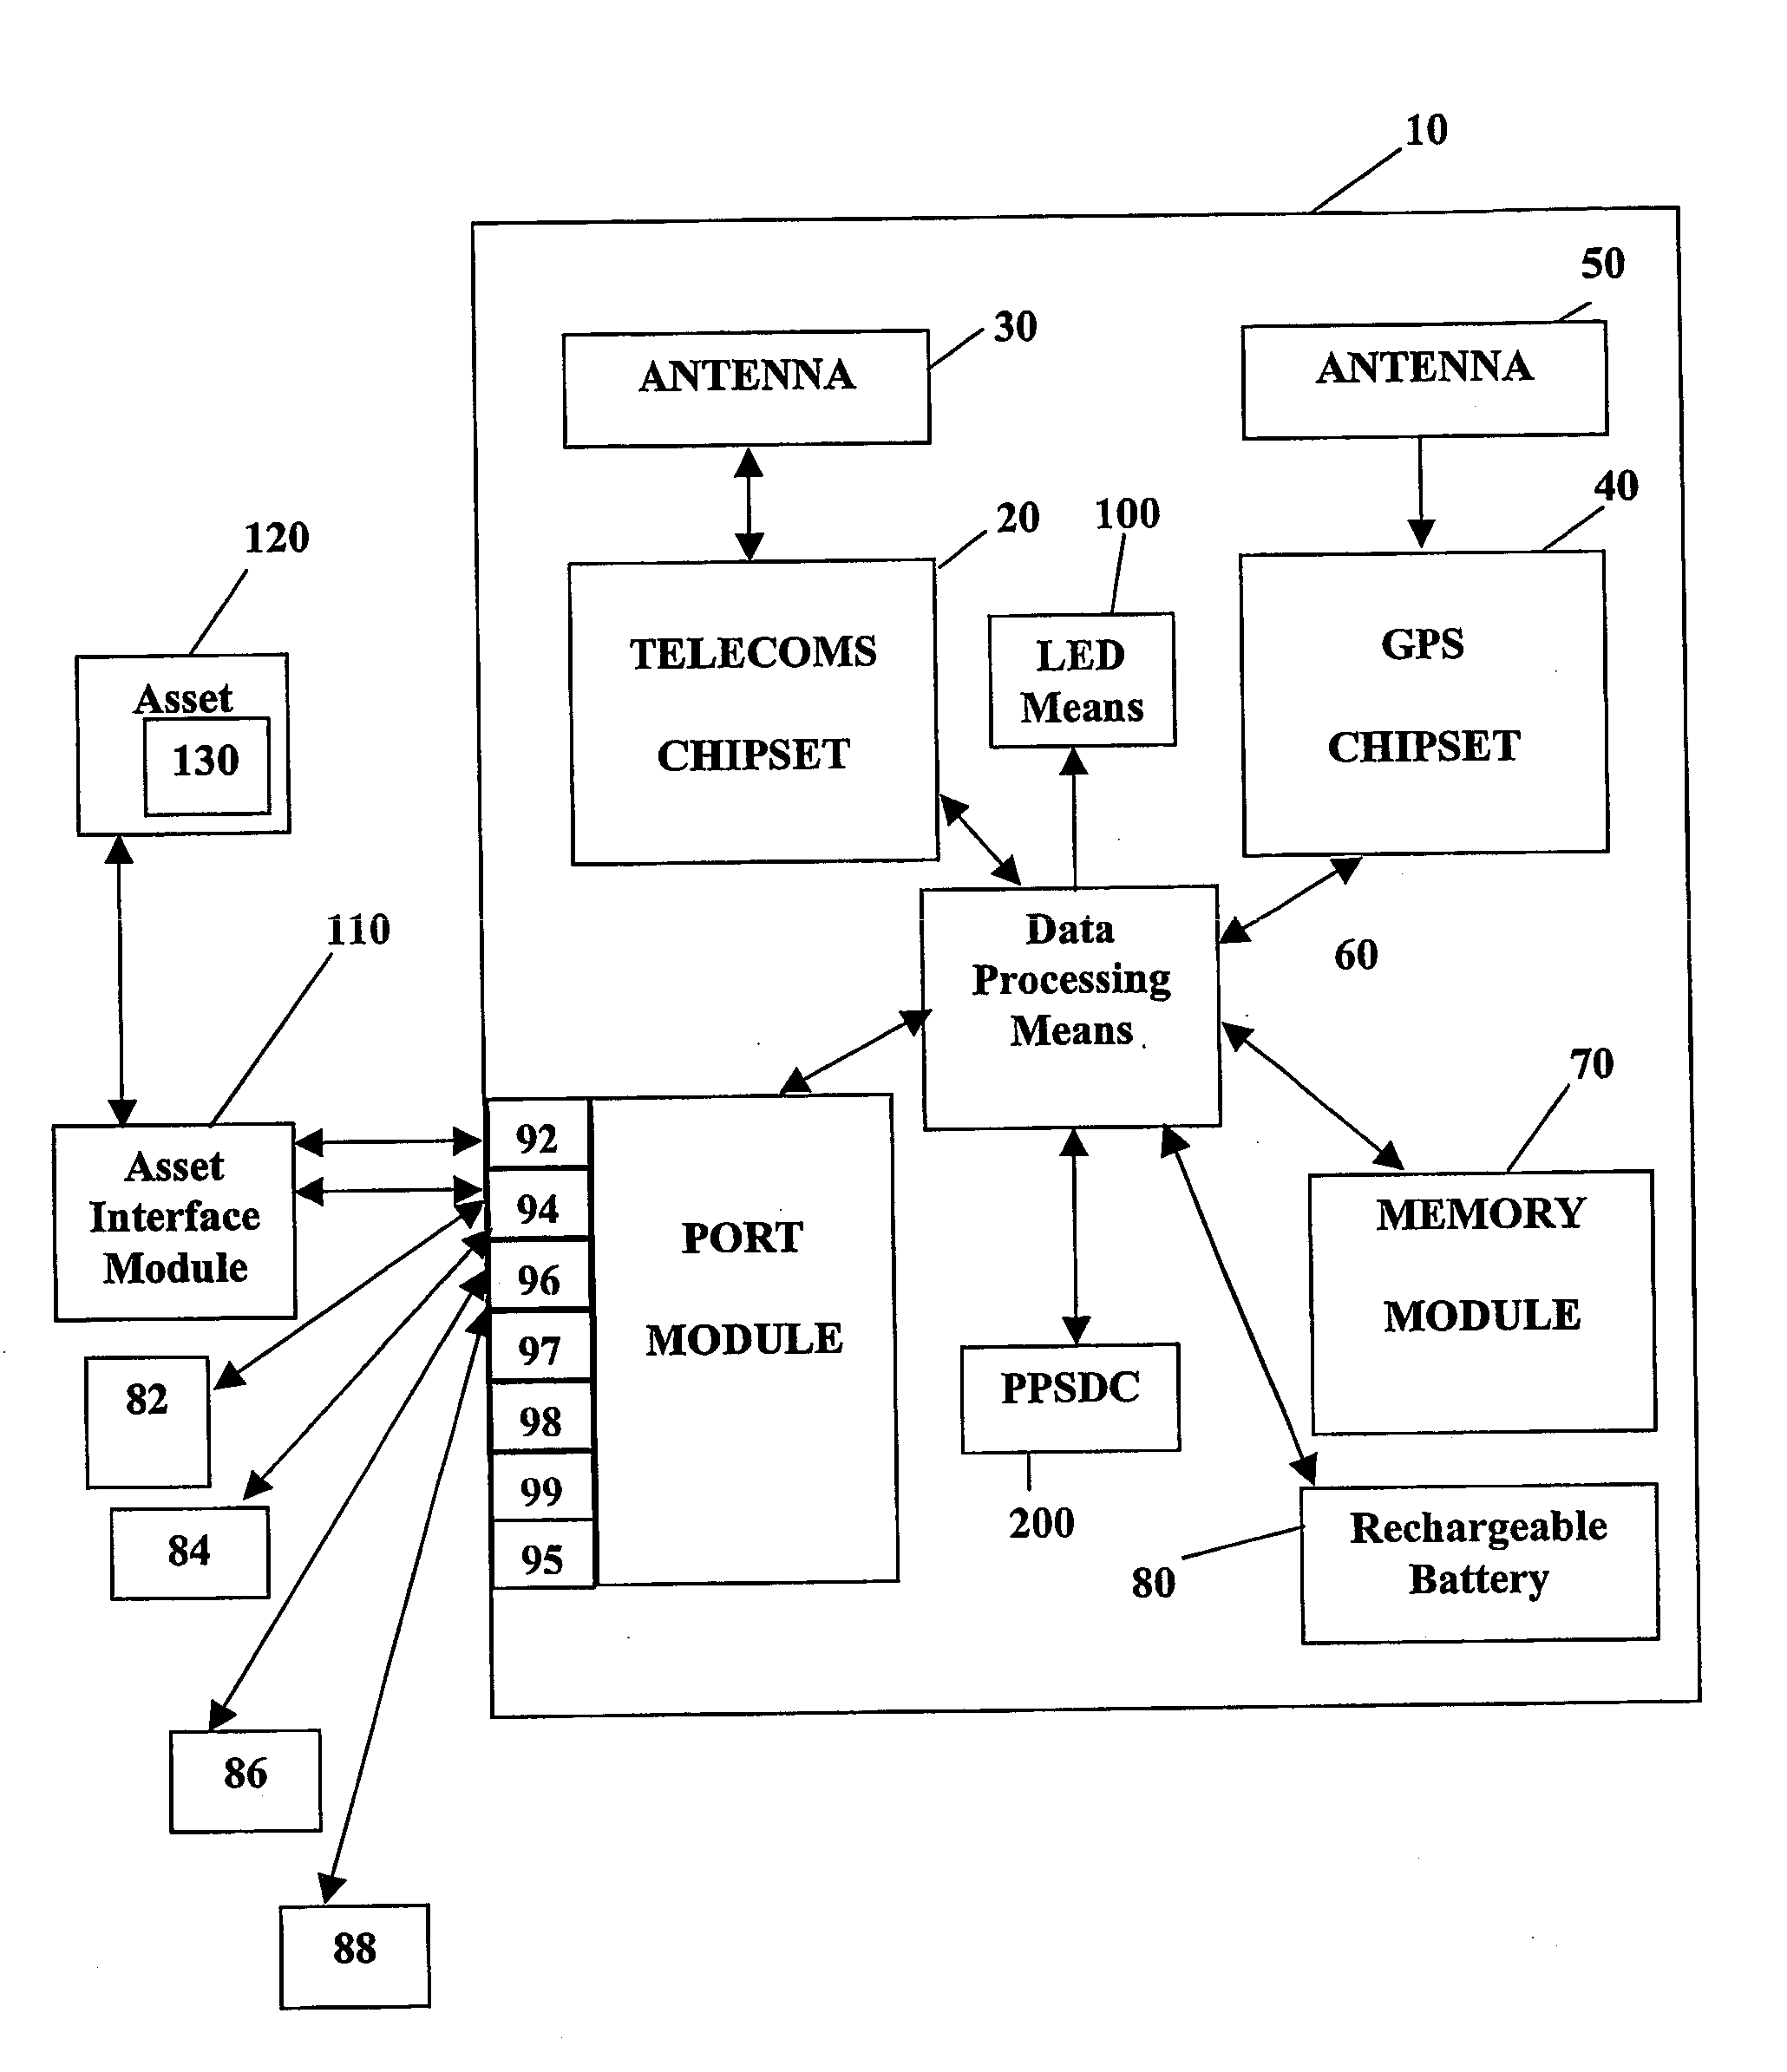 System and method for monitoring and control of wireless modules linked to assets